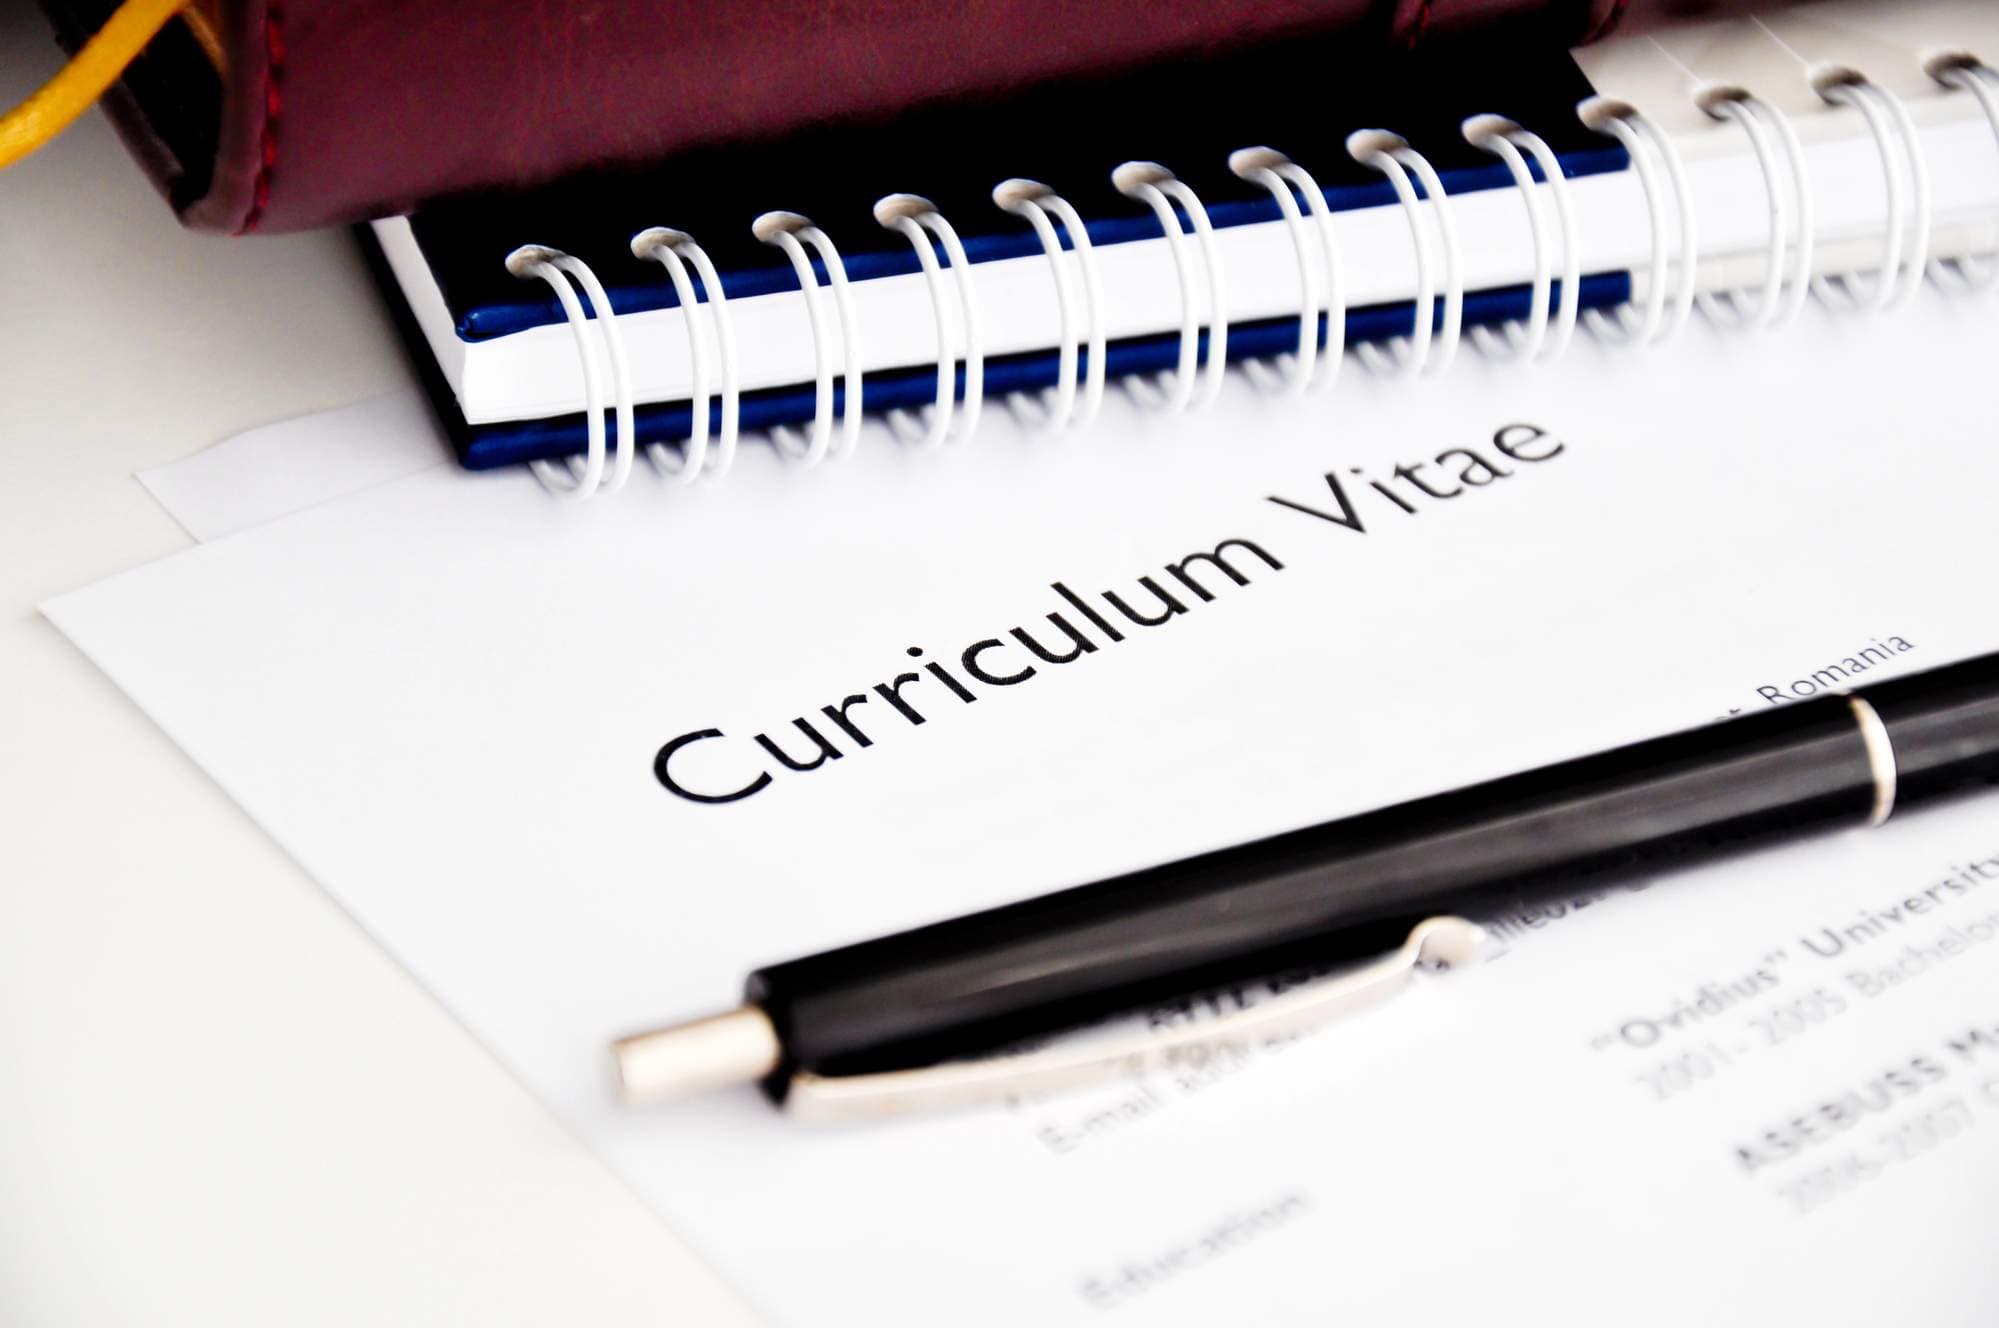 The Art of Getting to the Point - Crafting a Short, Sharp, and Successful CV